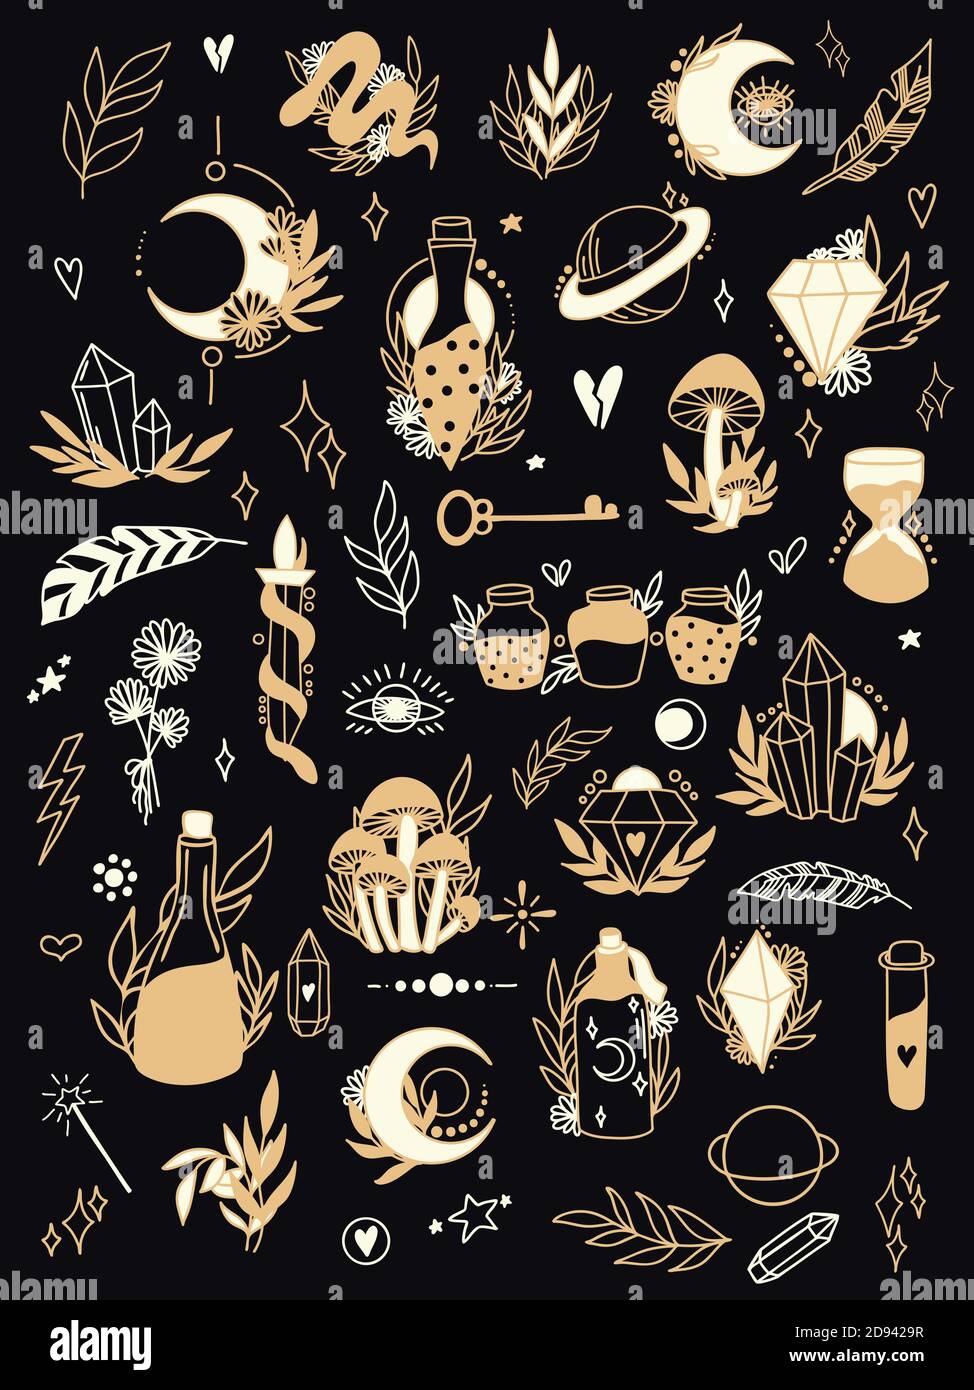 Magic Hand drawn, doodle, sketch line style set. Witchcraft symbols.Ethnic esoteric collection with hands, moon, crystals, plant, eye, palmistry Stock Vector